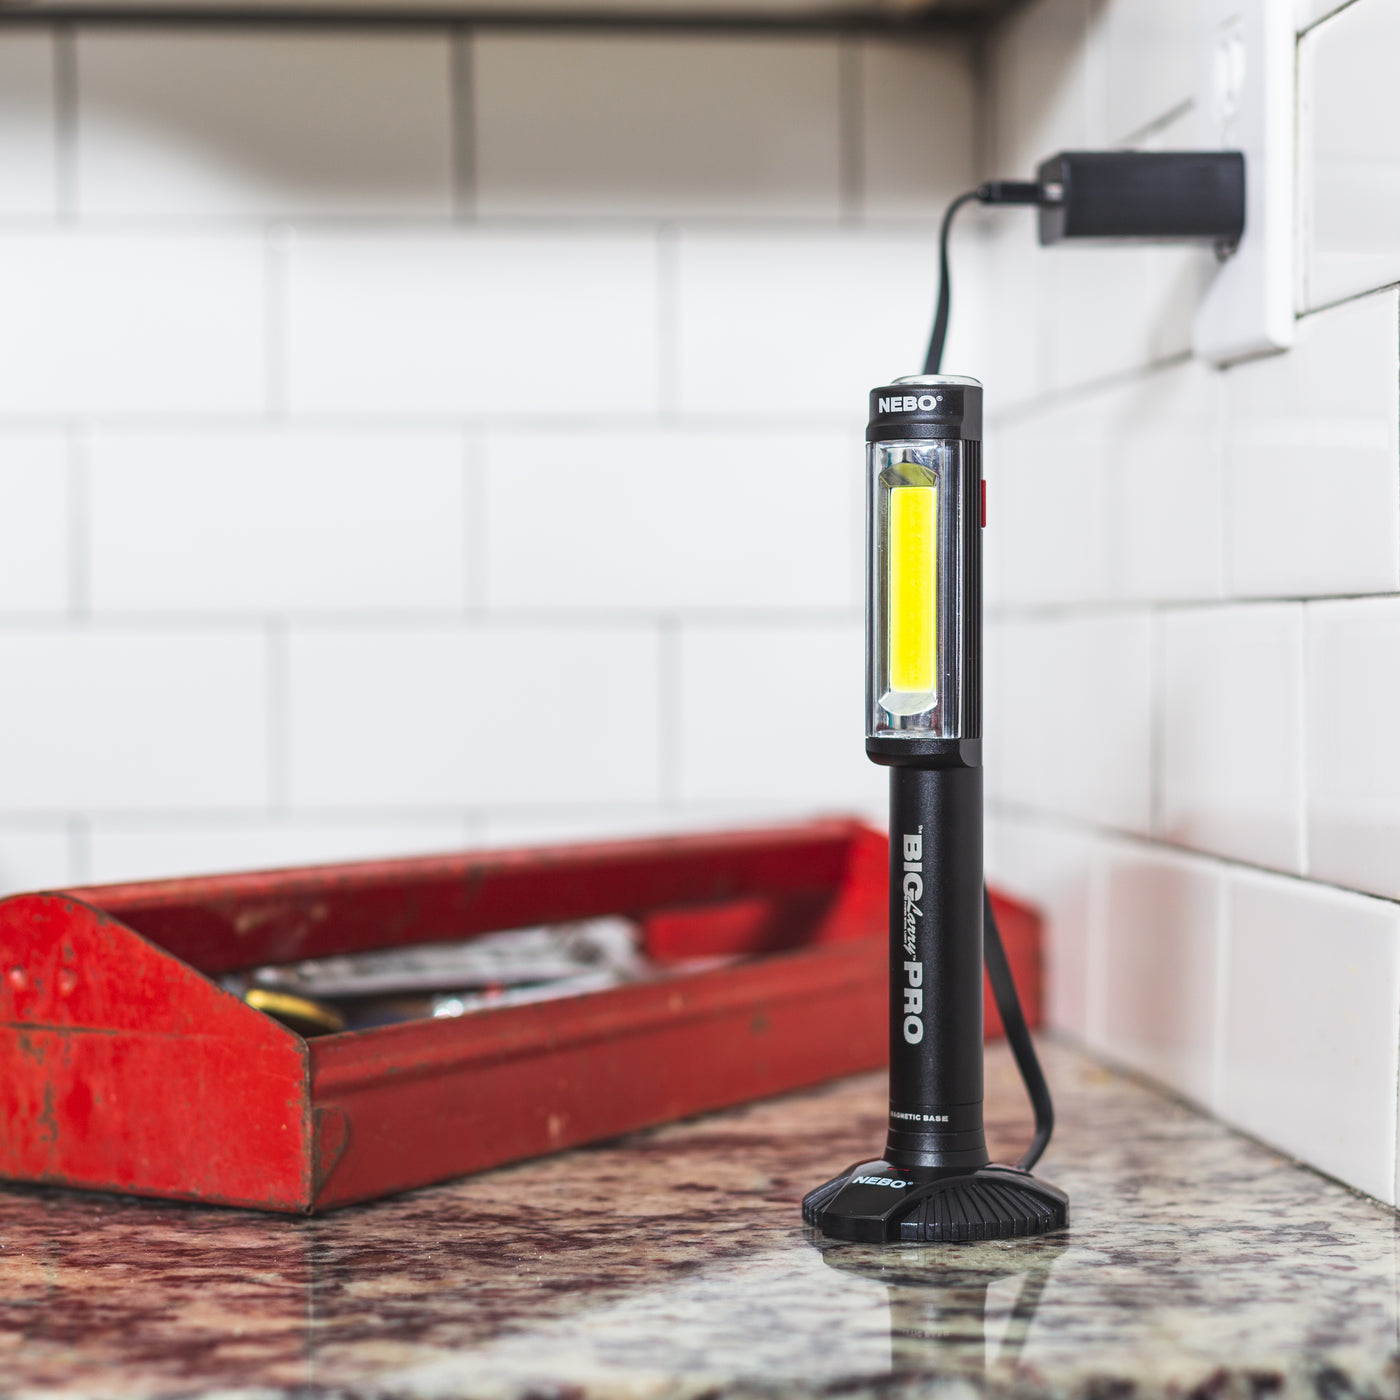 Rechargeable Big Larry Pro, the perfect tradespersons work light